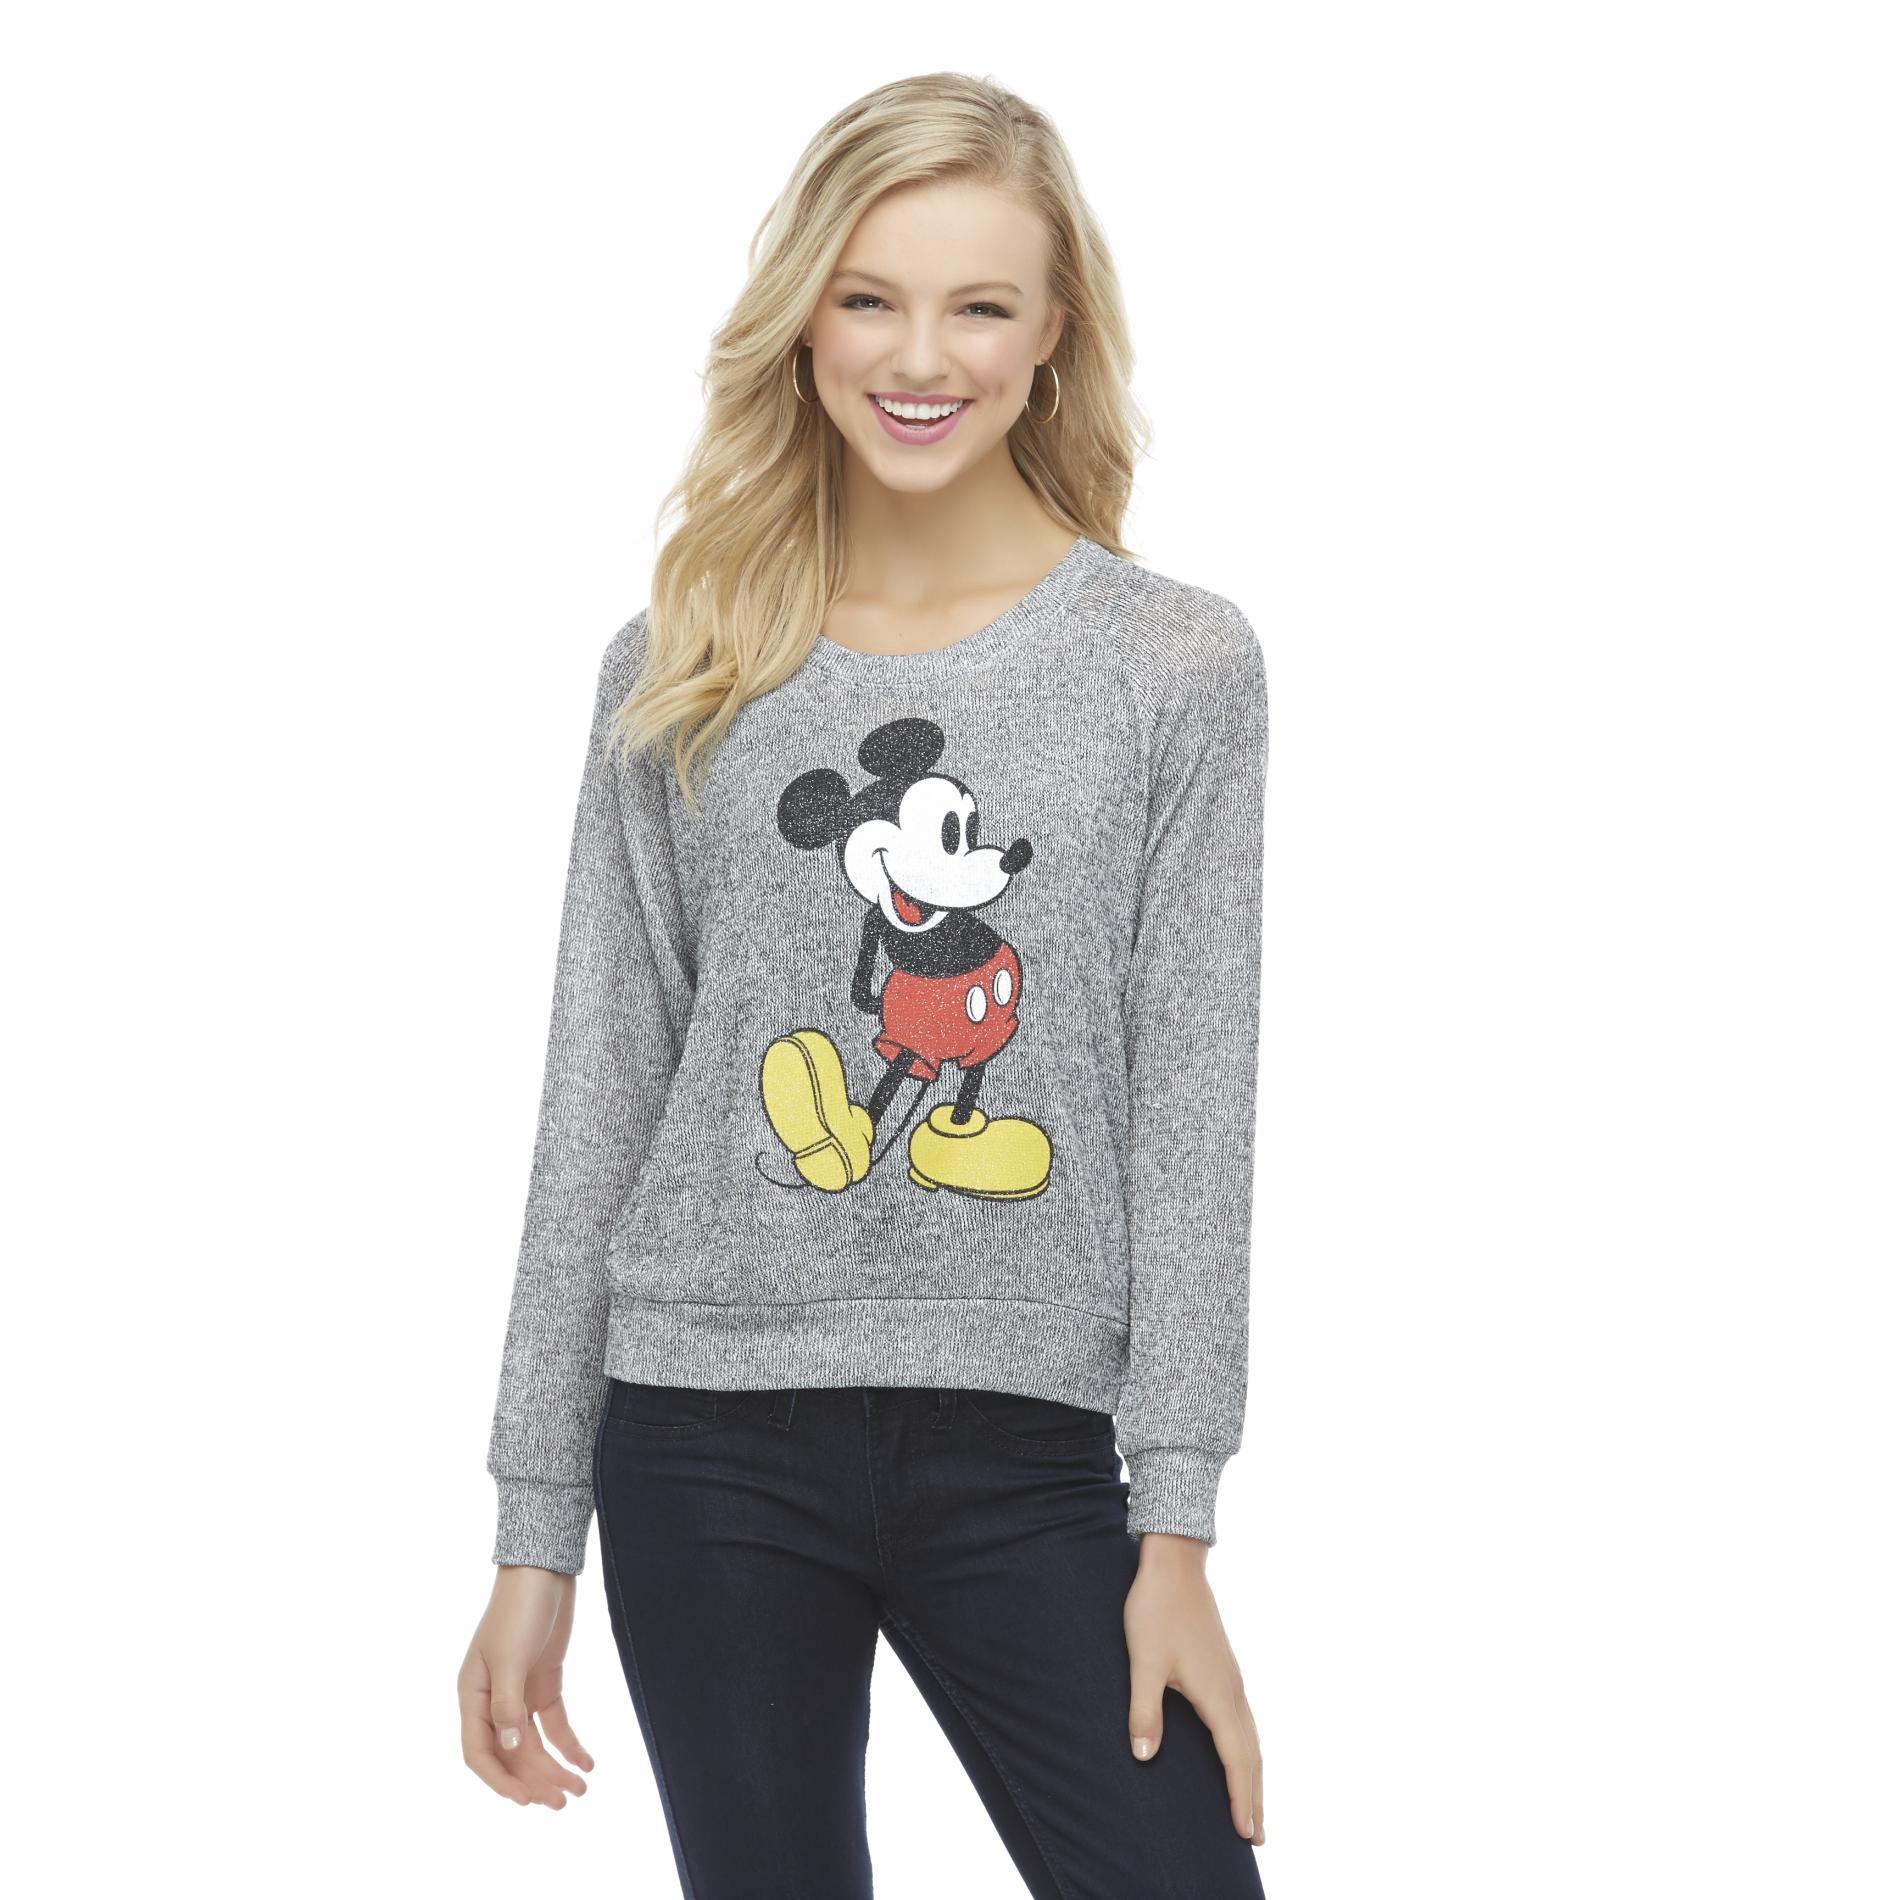 Modern Lux Mickey Mouse Junior's Novelty Sweater